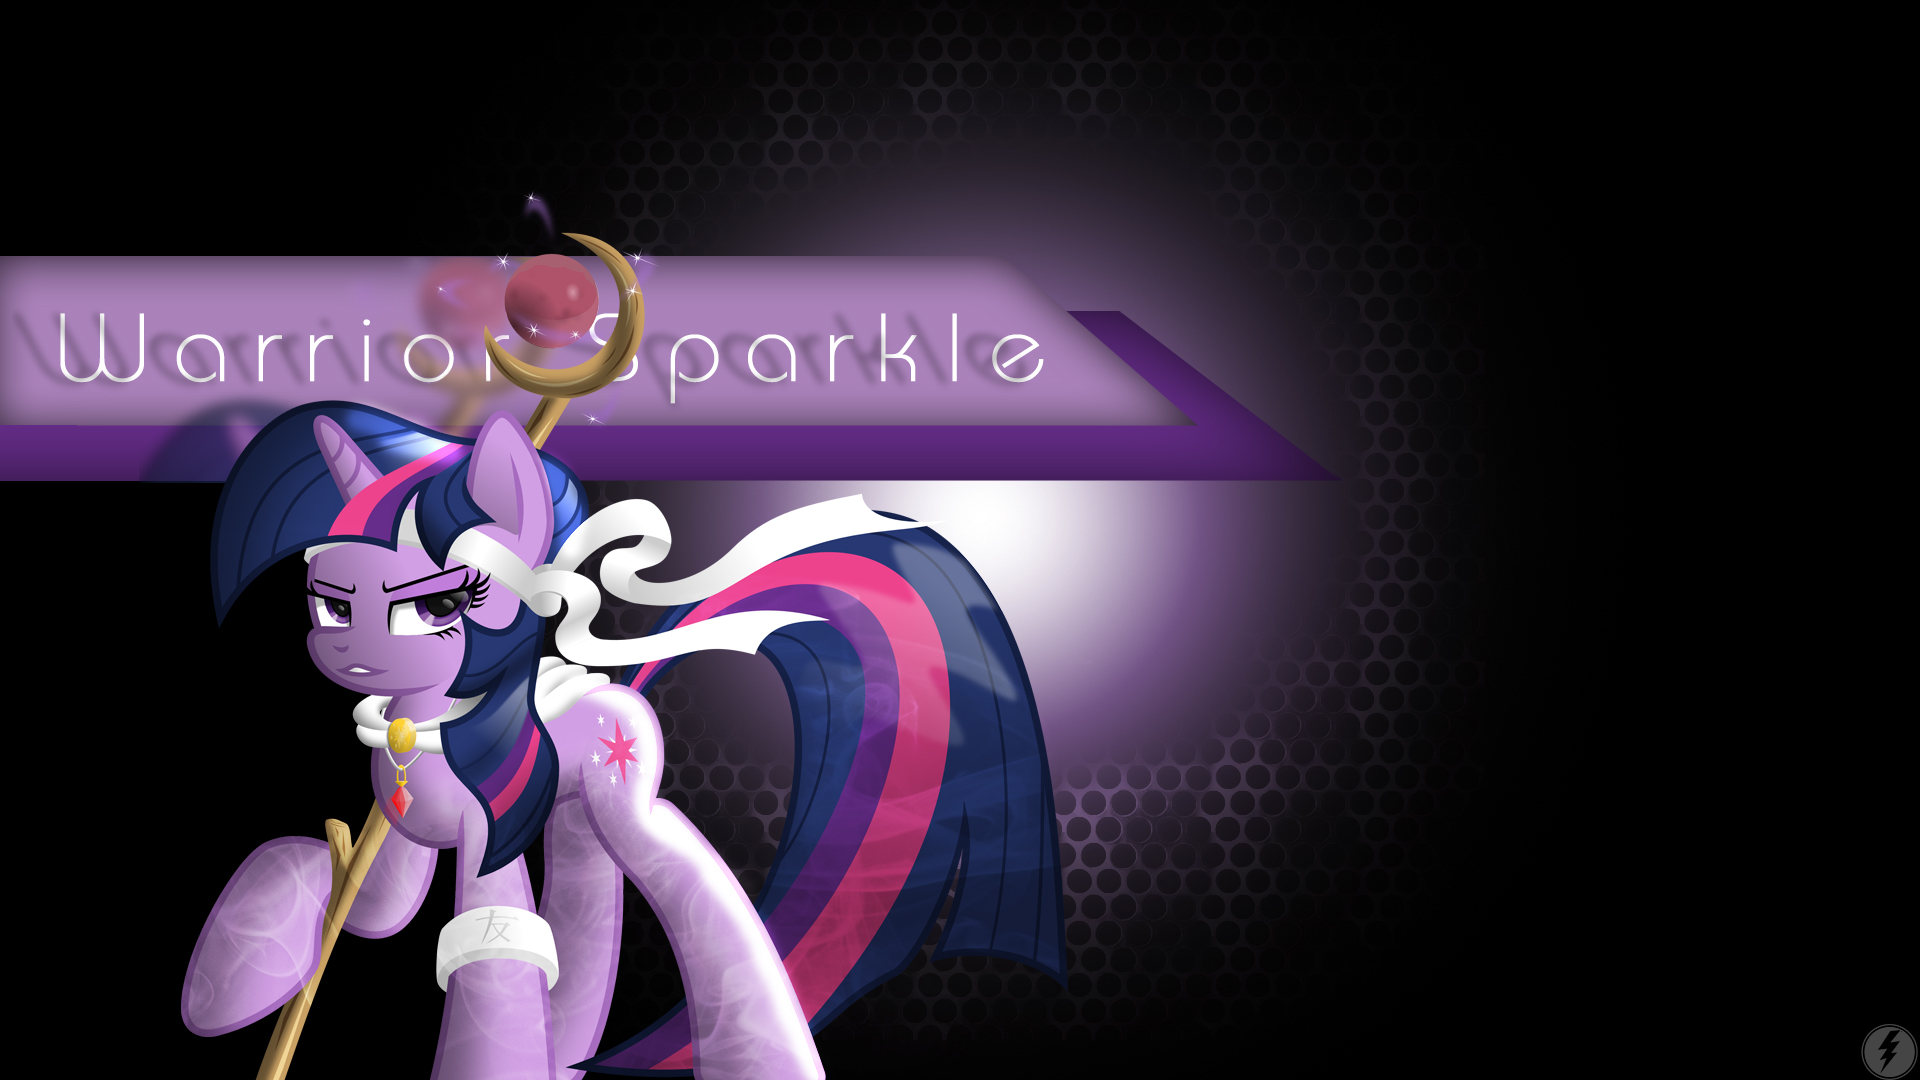 Warrior Sparkle Wallpaper by IIThunderboltII and RatchetHuN